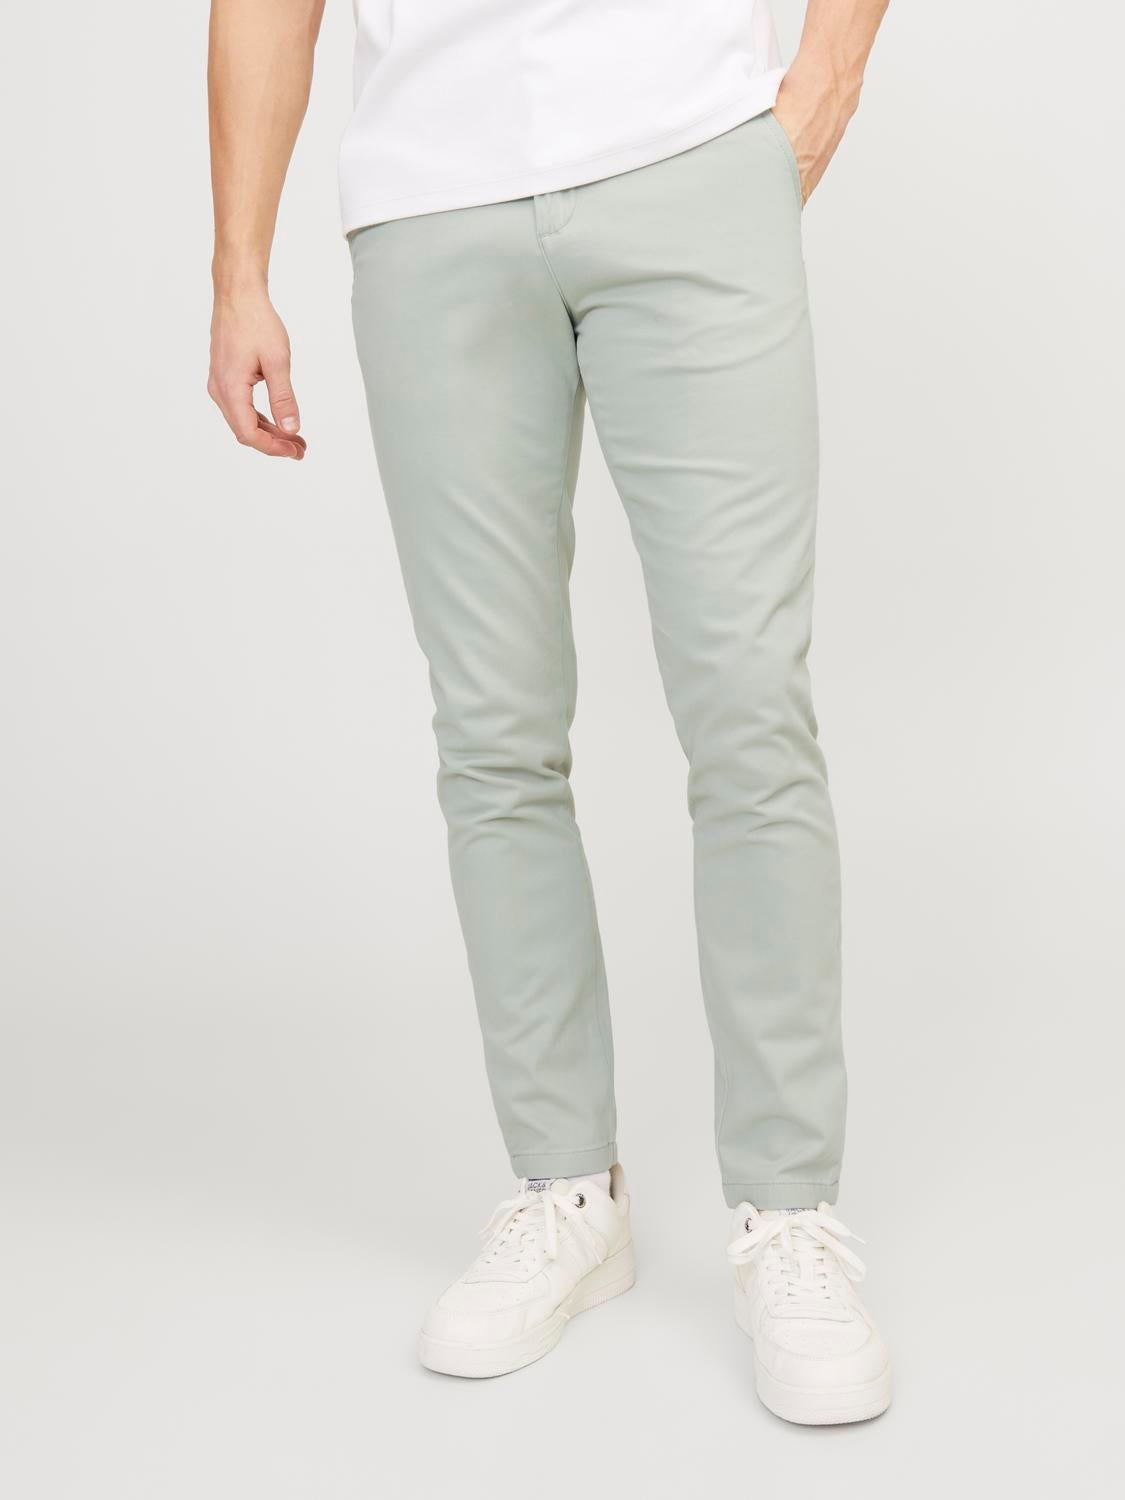 21 Awesome Mint Pants Outfits For Men - Styleoholic